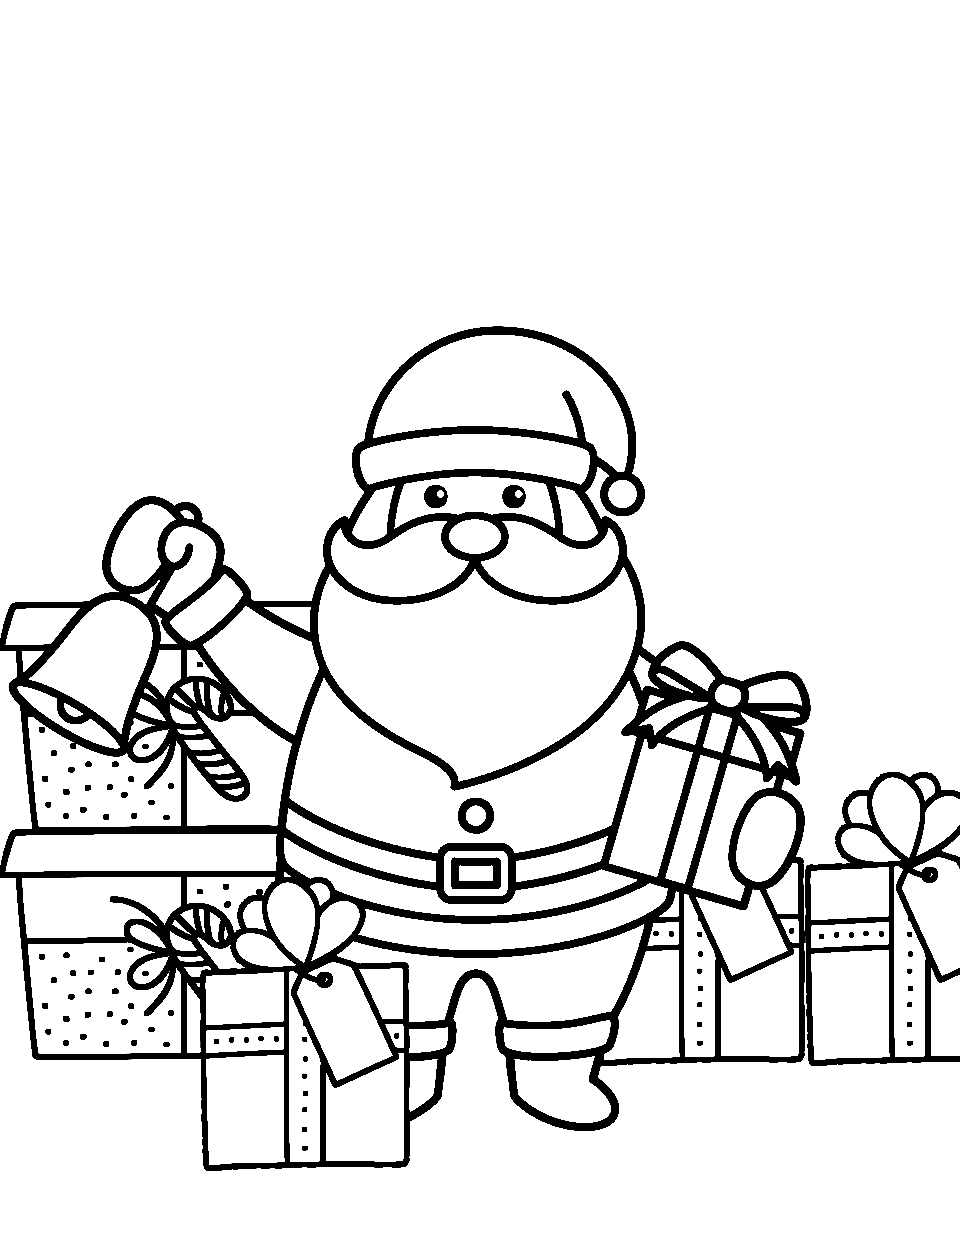 Santa with Gifts Coloring Page - Santa standing with tons of gifts ready to give out to everyone on Christmas day.